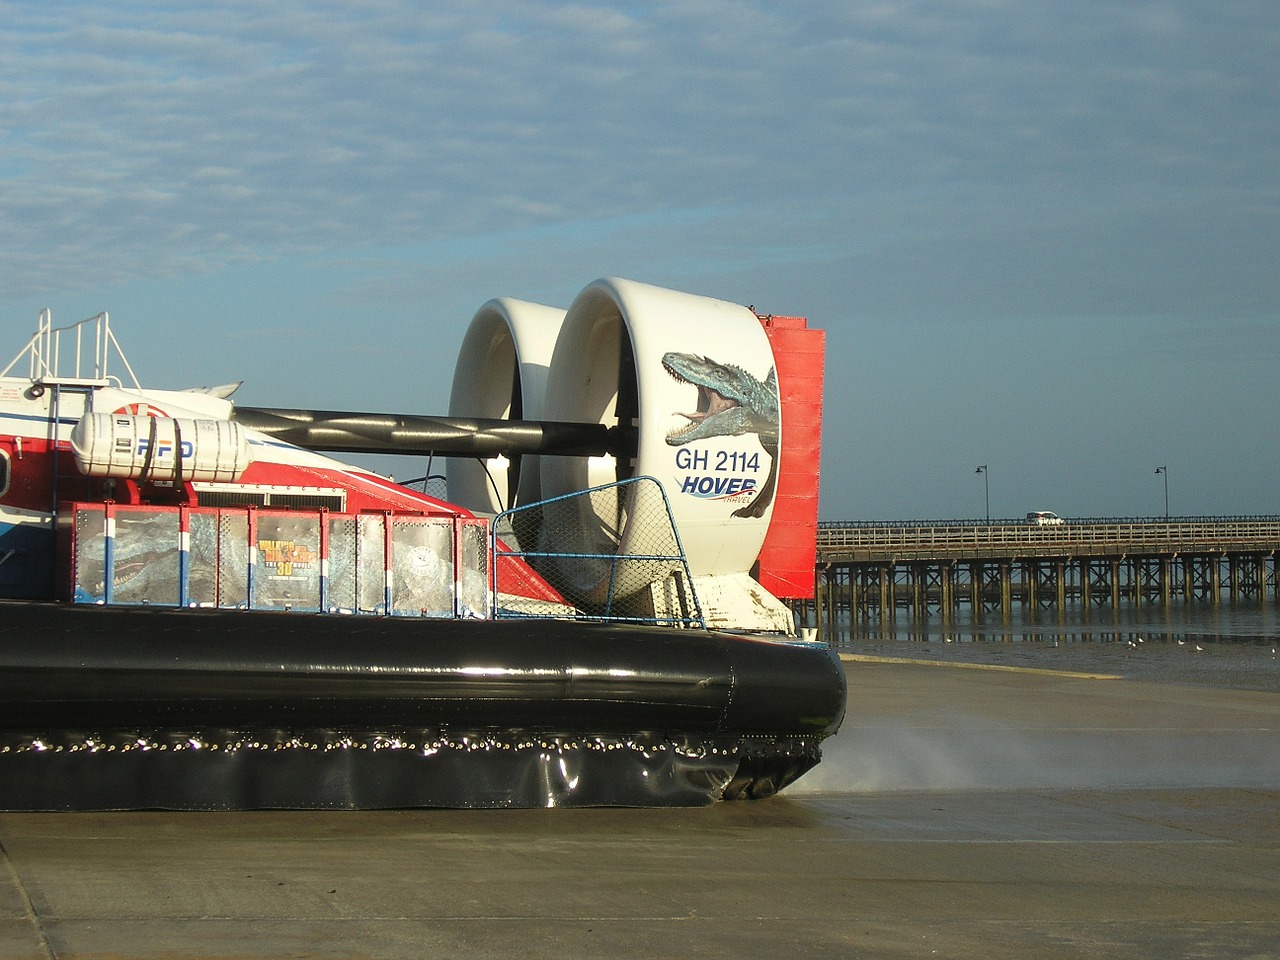 hovercraft,transport,transportation,water,nautical,engine,technology,hover,cushion,propeller,design,sea,passenger,crossing,free pictures, free photos, free images, royalty free, free illustrations, public domain